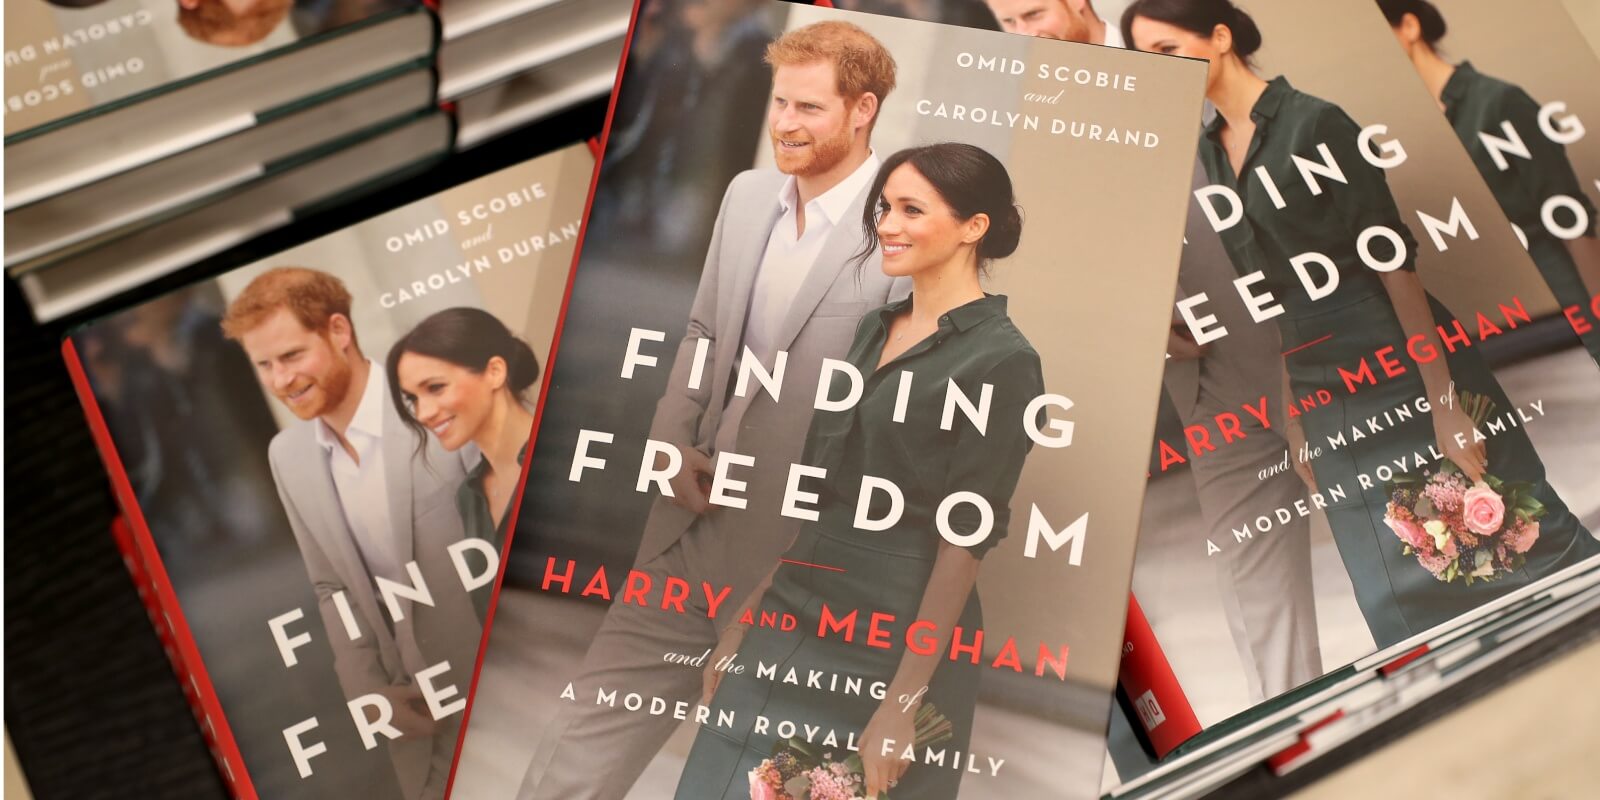 The book 'Finding Freedom' about Prince Harry and Meghan Markle.